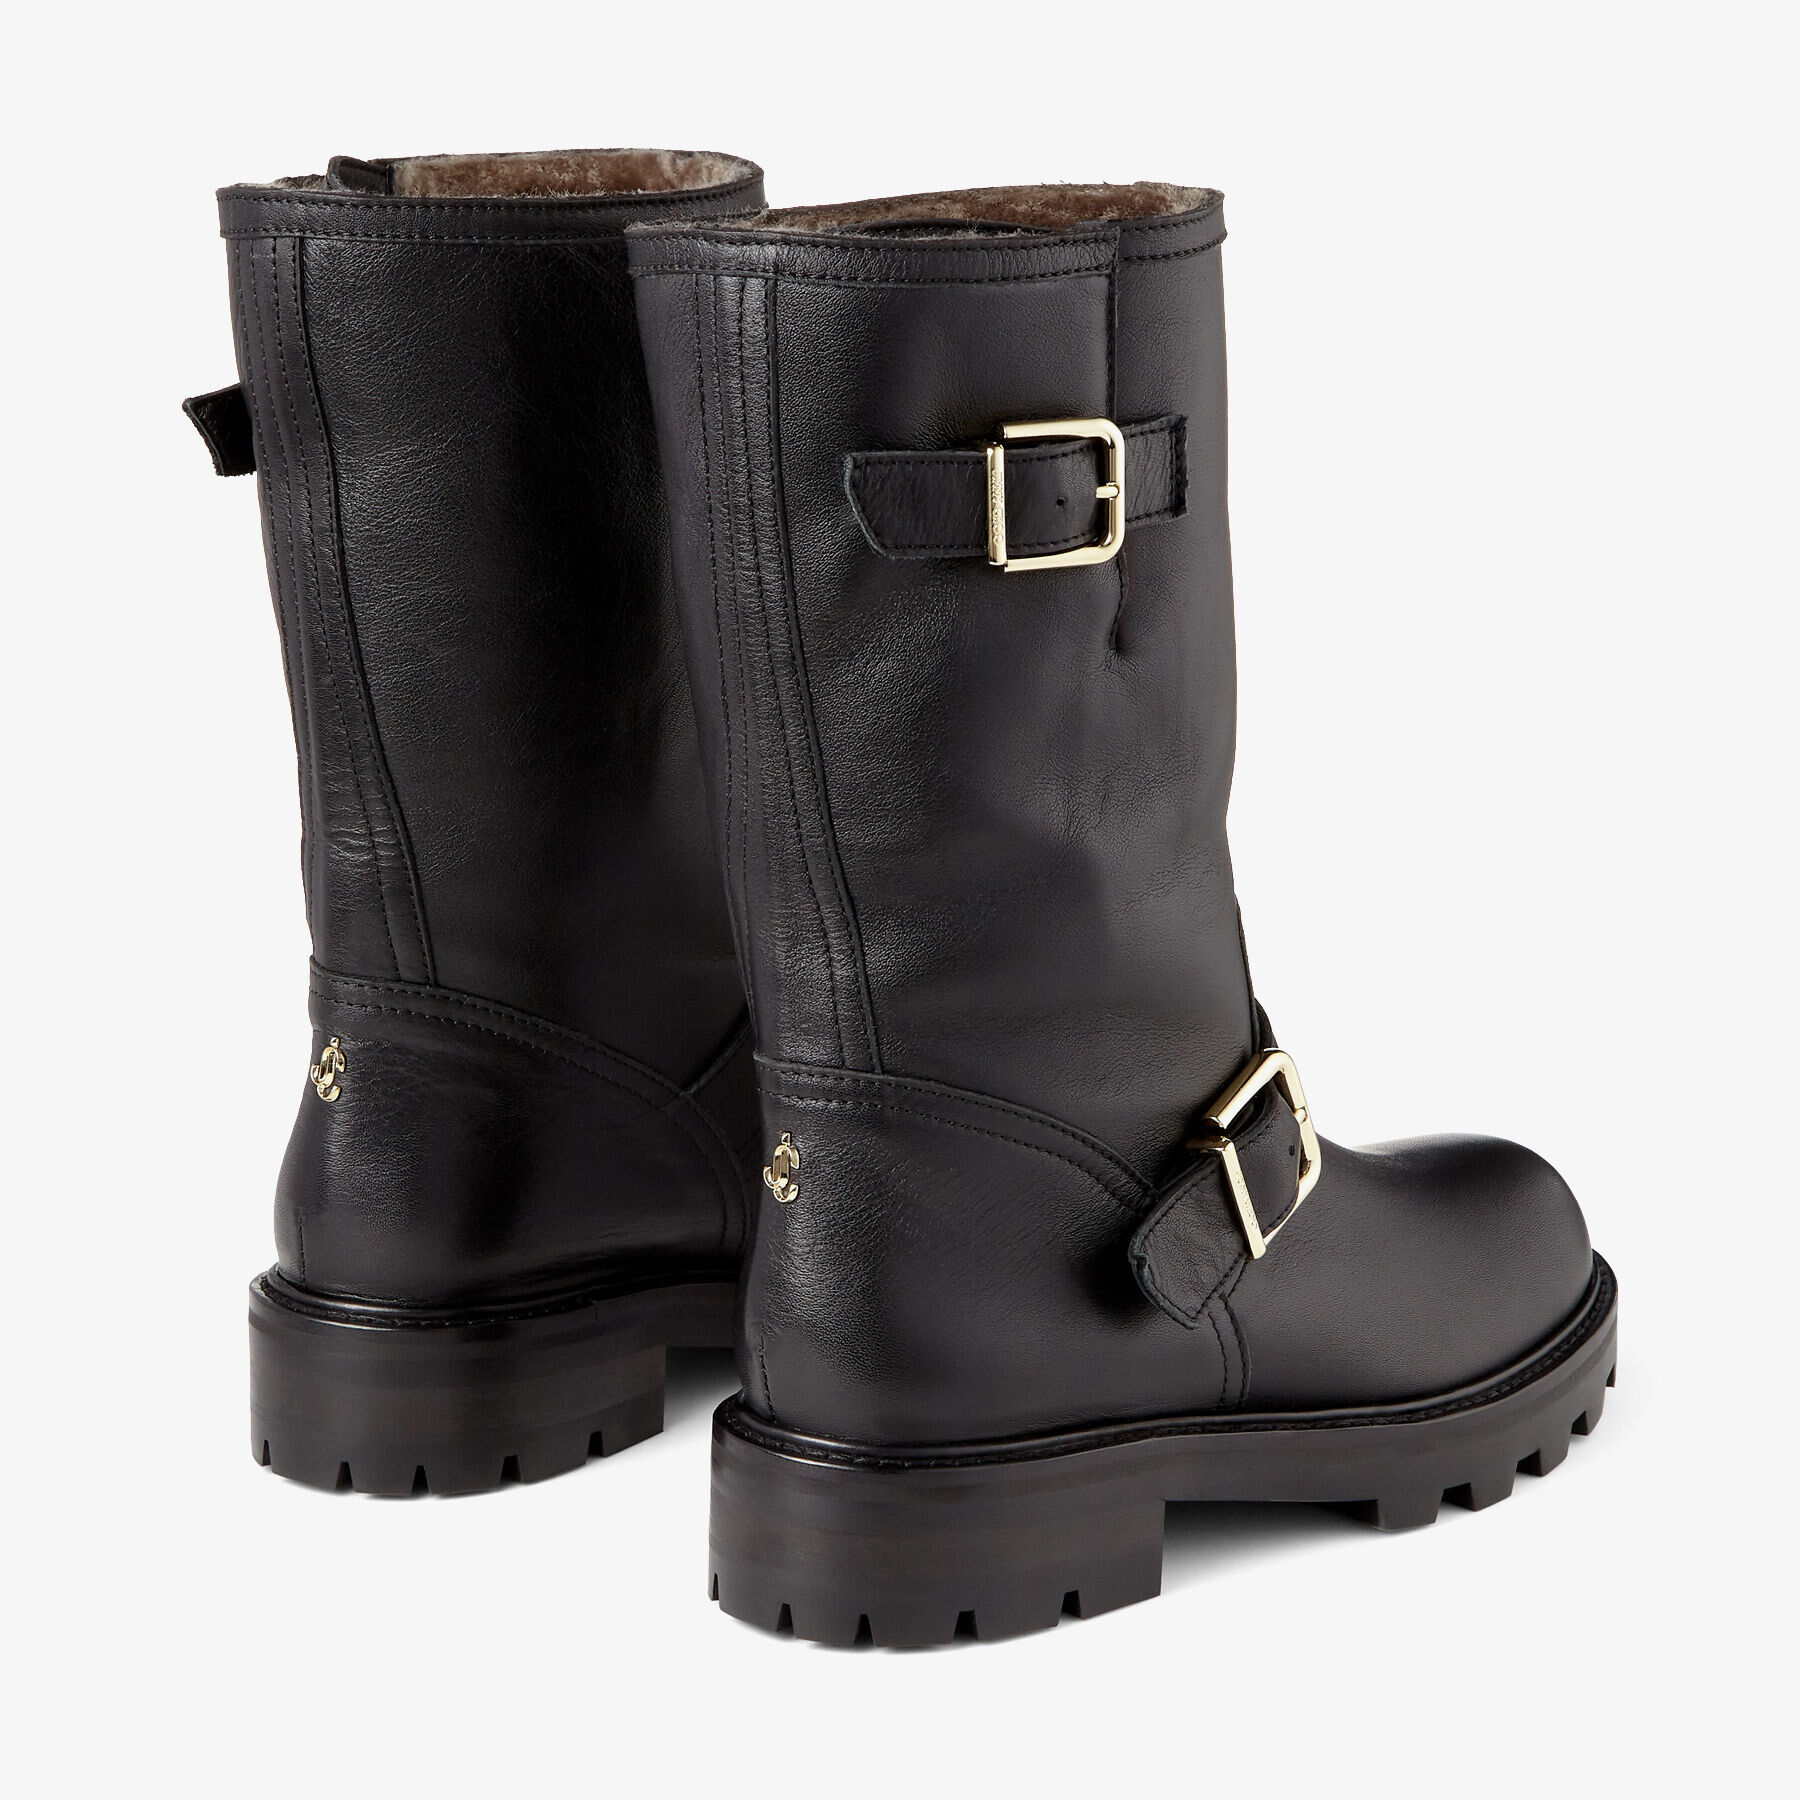 Black Smooth Leather Biker Boots with Shearling Lining|BIKER II |Cruise ...